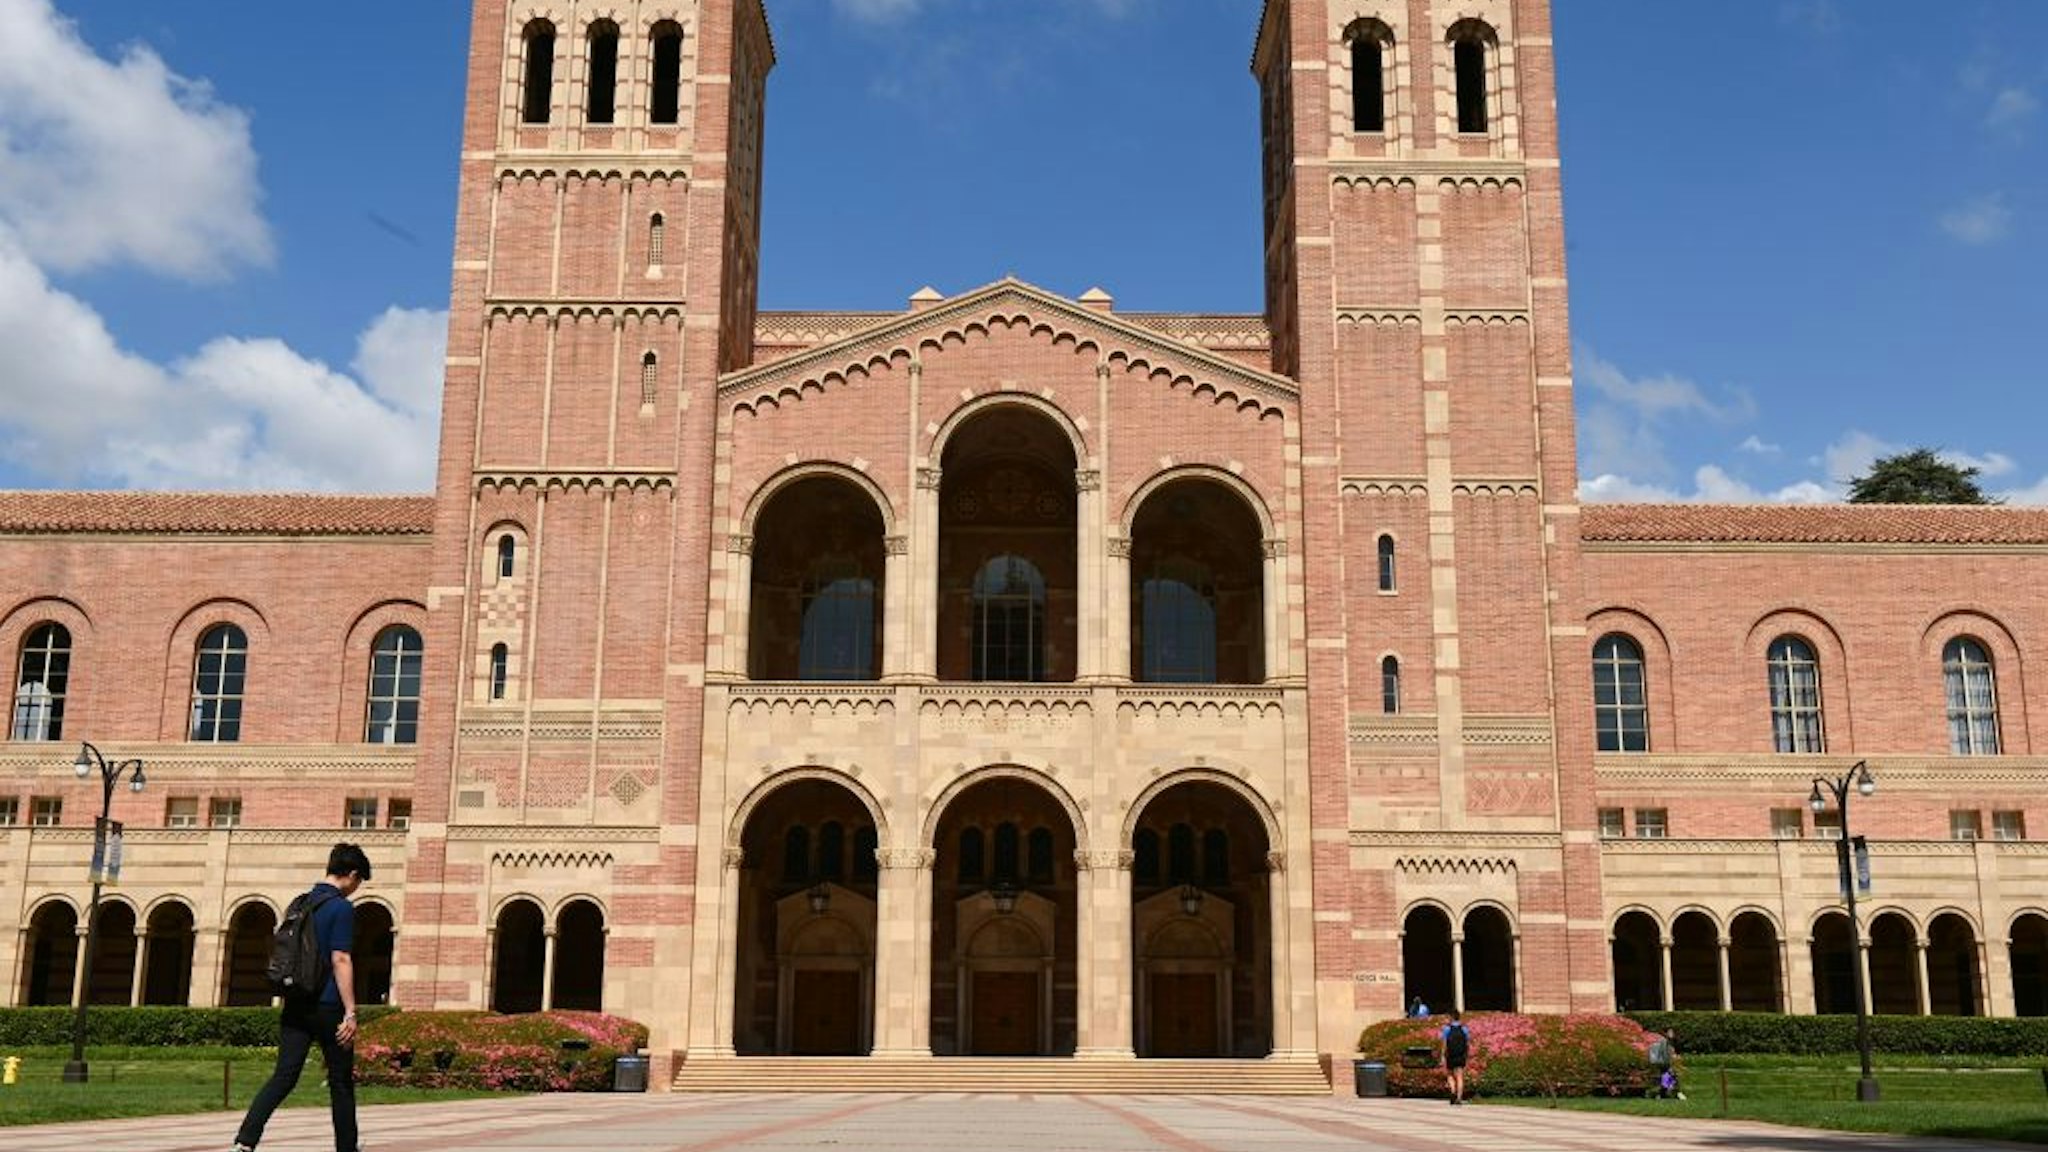 A student walks toward Royce Hall on the campus of University of California at Los Angeles (UCLA) in Los Angeles, California on March 11, 2020. - Starting this week many southern California universities including UCLA will suspend in-person classes due to coronavirus concerns. (Photo by Robyn Beck / AFP) (Photo by ROBYN BECK/AFP via Getty Images)